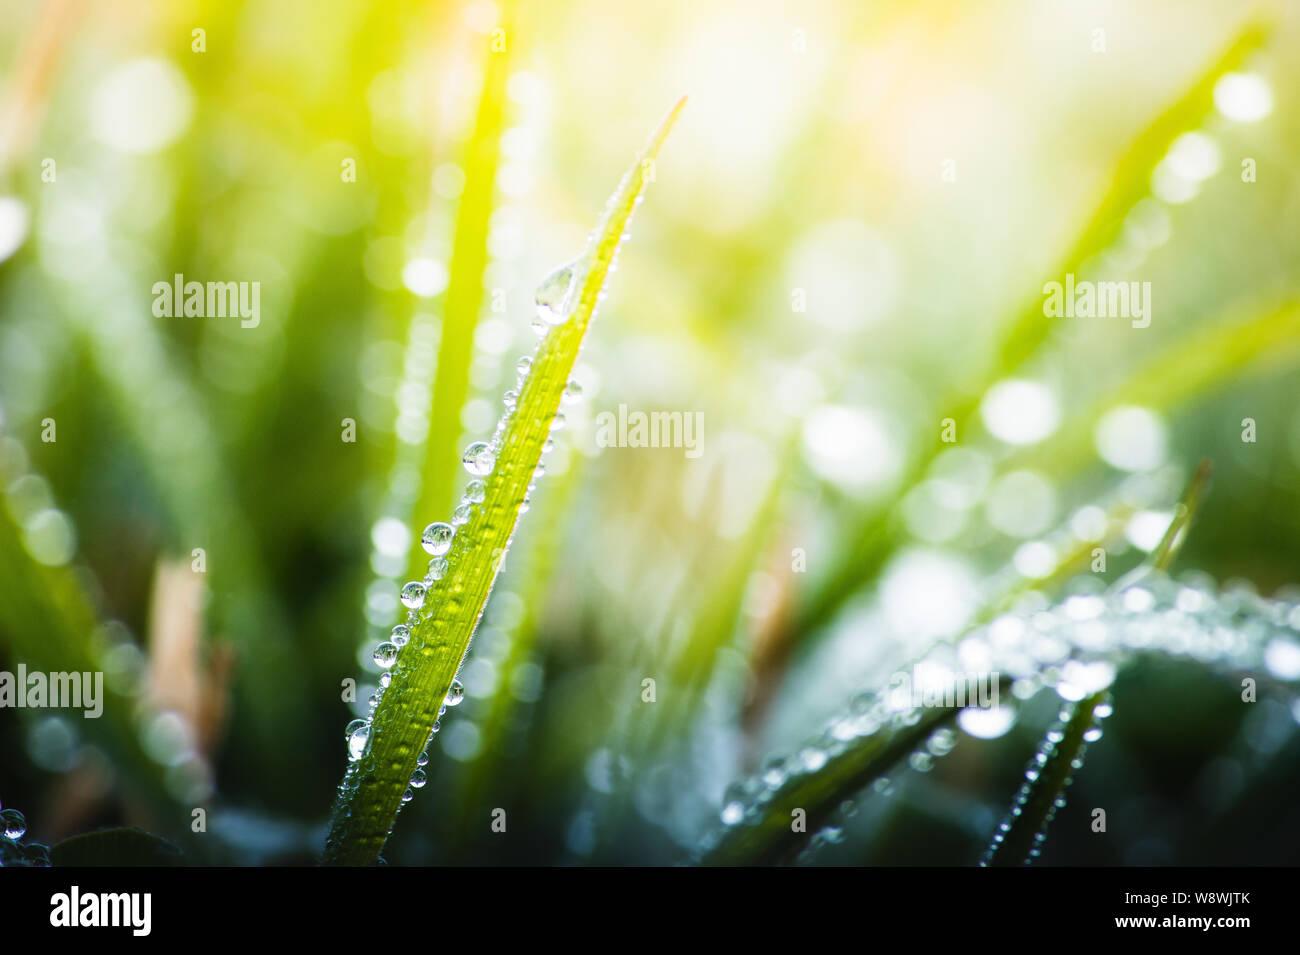 Fresh morning dew drops on green grass macro nature background